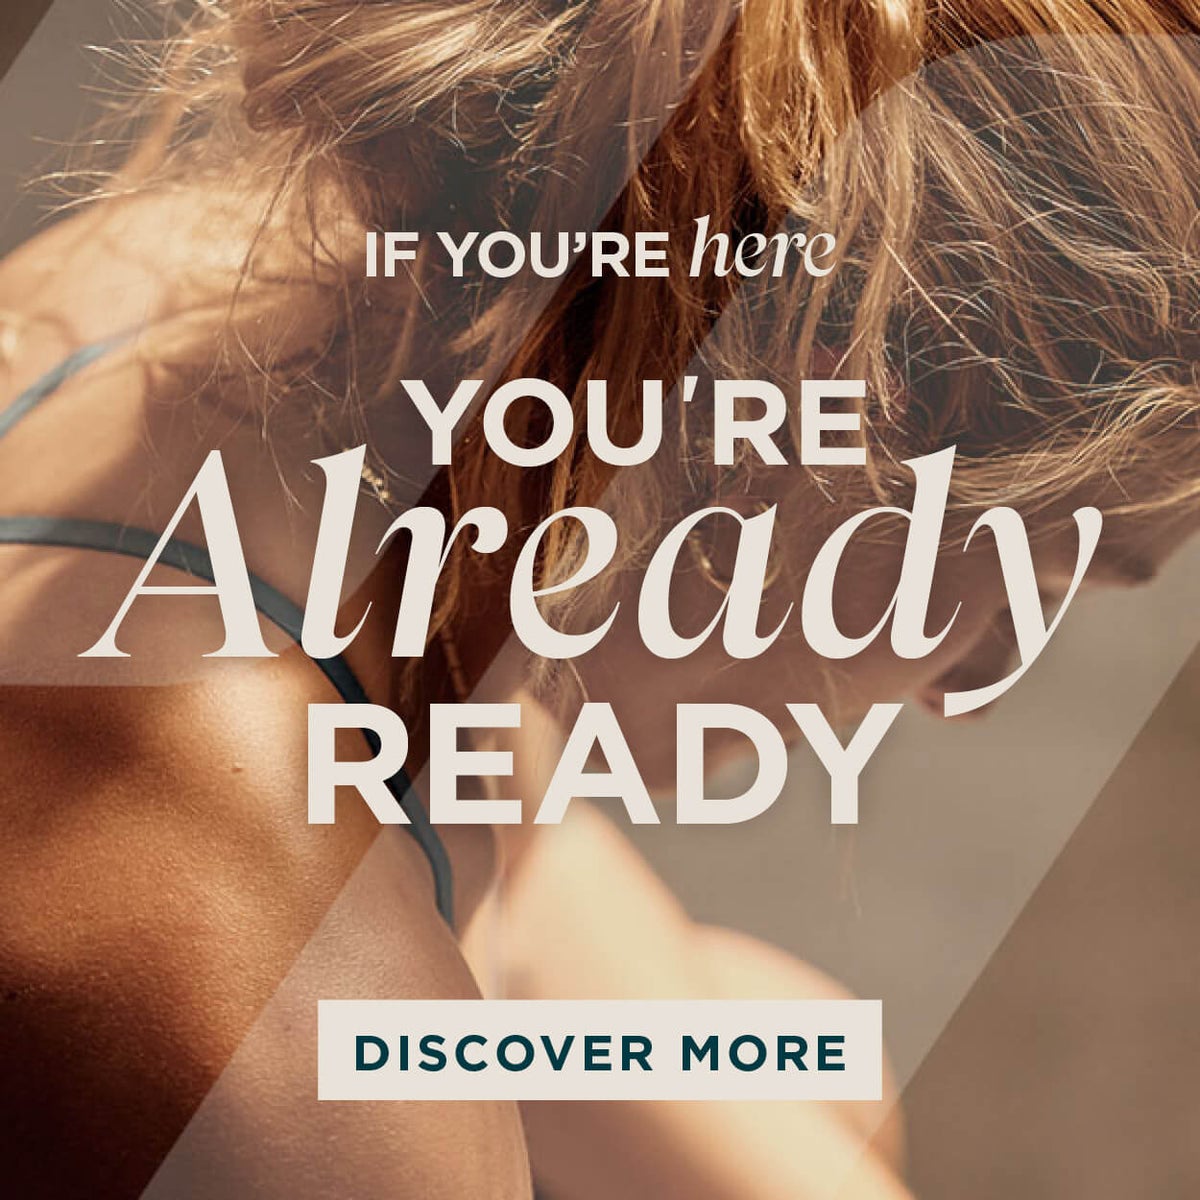 If you're here you're already ready. Discover more